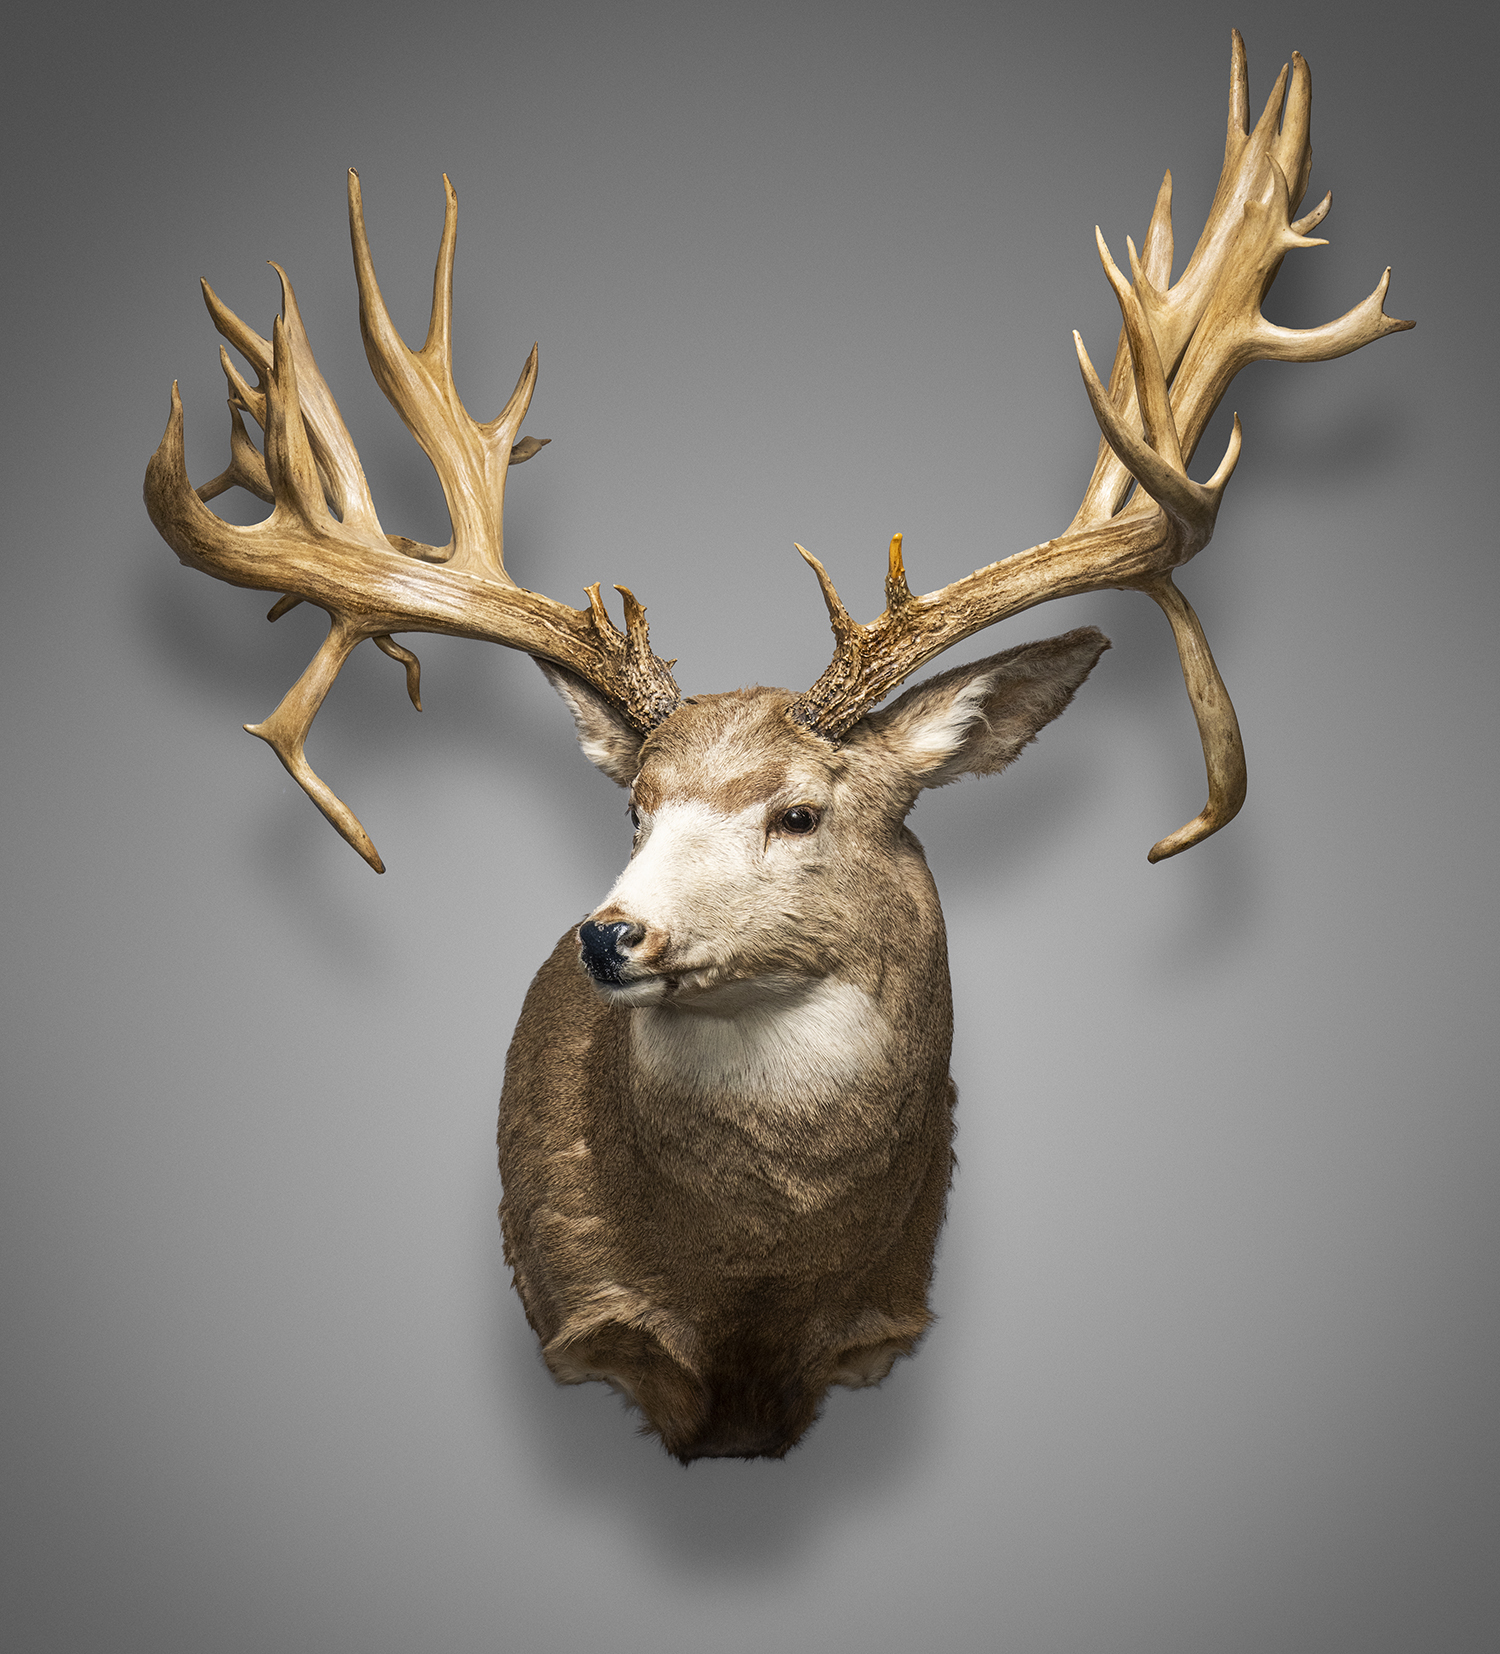 A whitetail trophy mount from the National Collection of Heads and Horns.